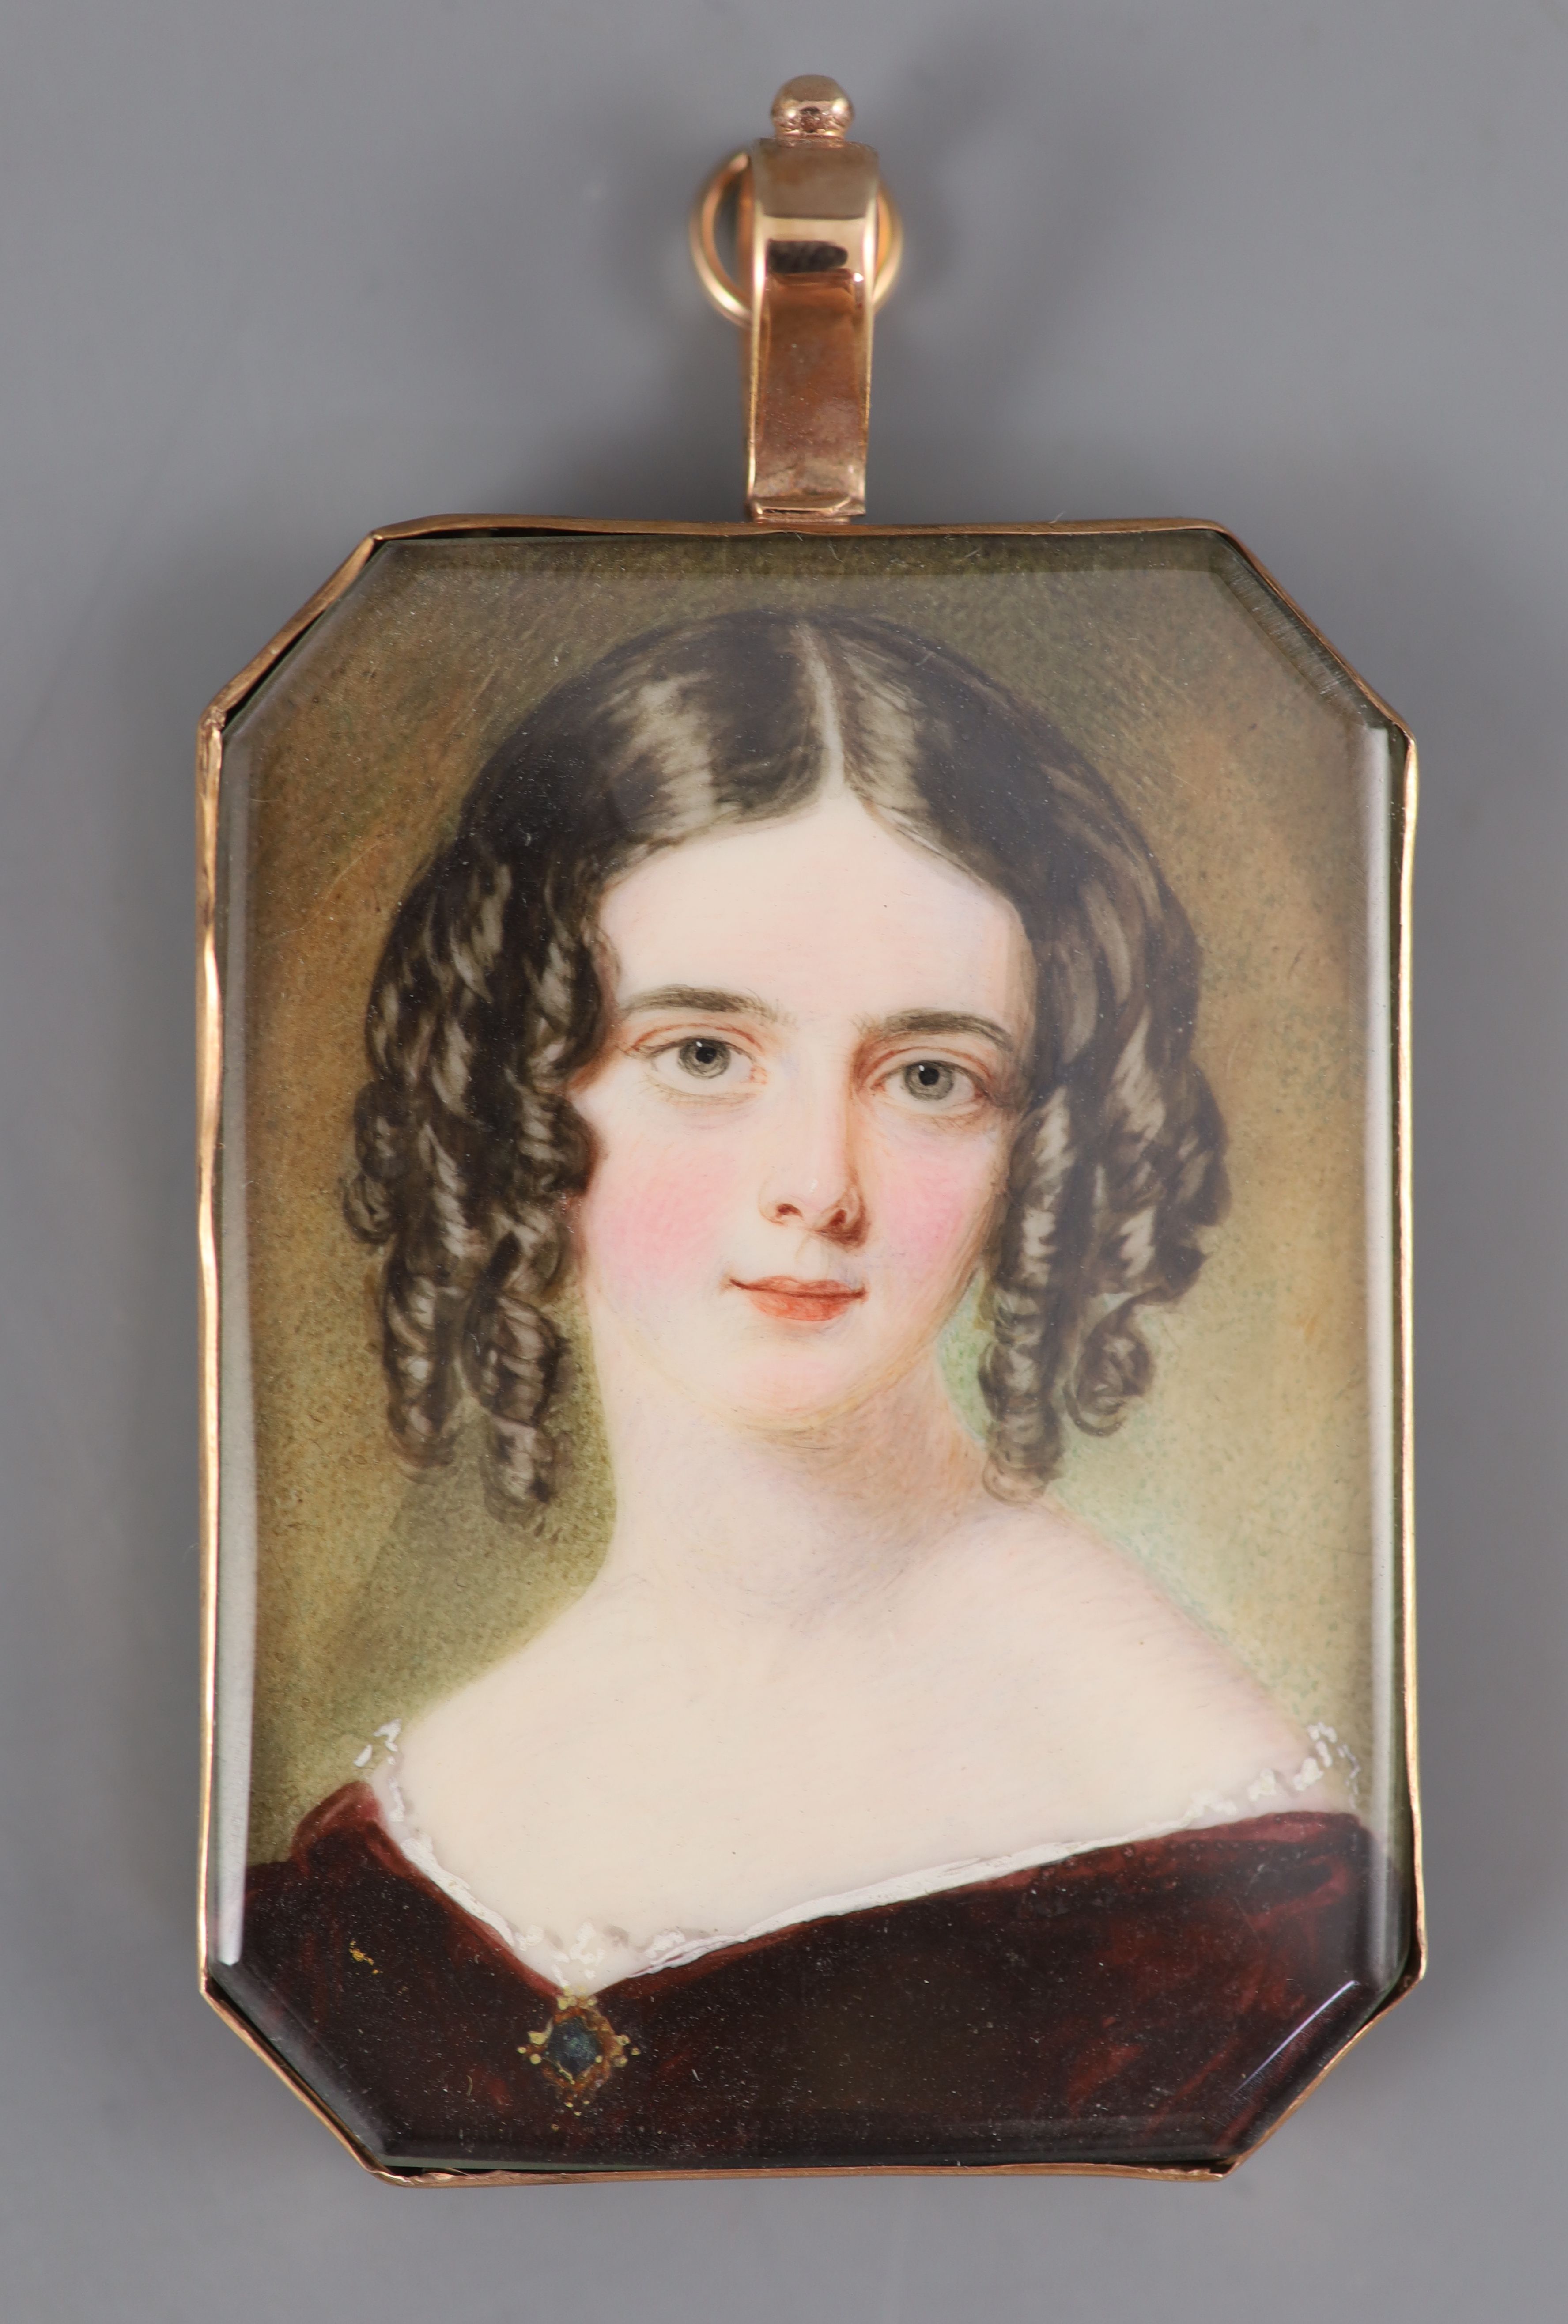 William Egley (1798-1870) Portrait miniature of a young lady wearing a purple dress and sapphire set jewel 2 x 1.5in, gold framed